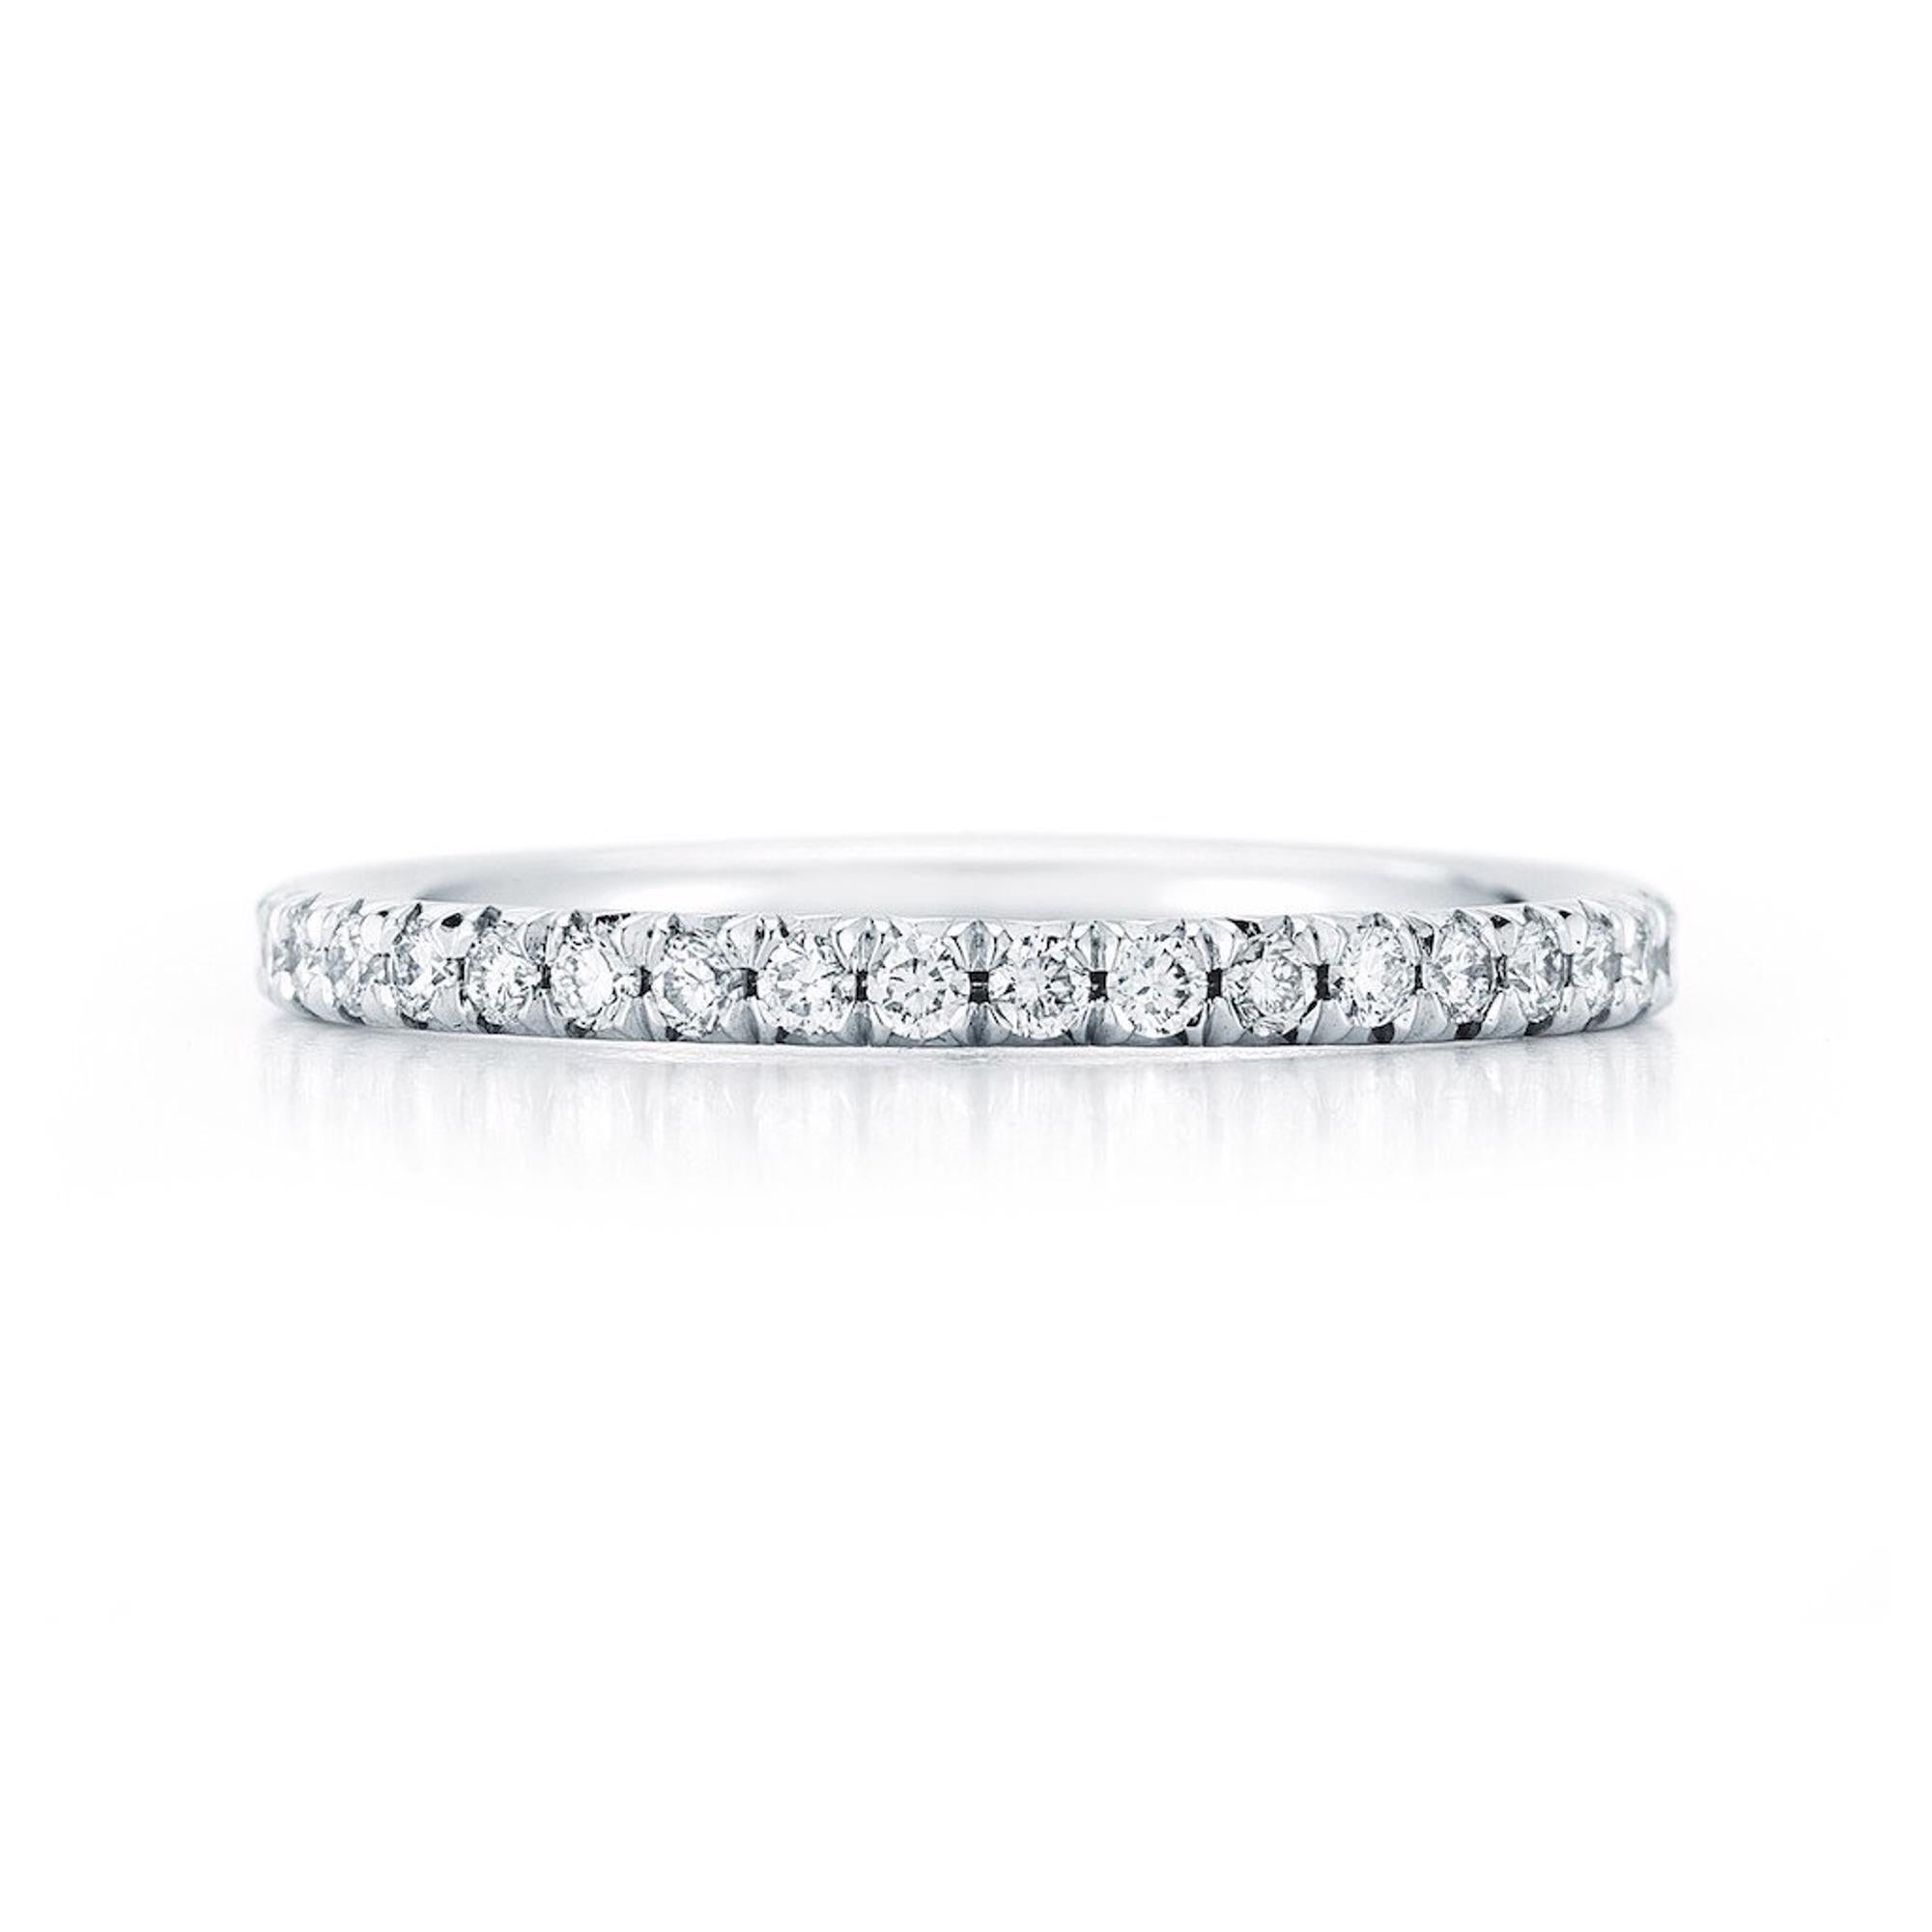 Rachael Koen French Pave Diamond Eternity Band 18K White Gold 0.45cttw In New Condition For Sale In New York, NY